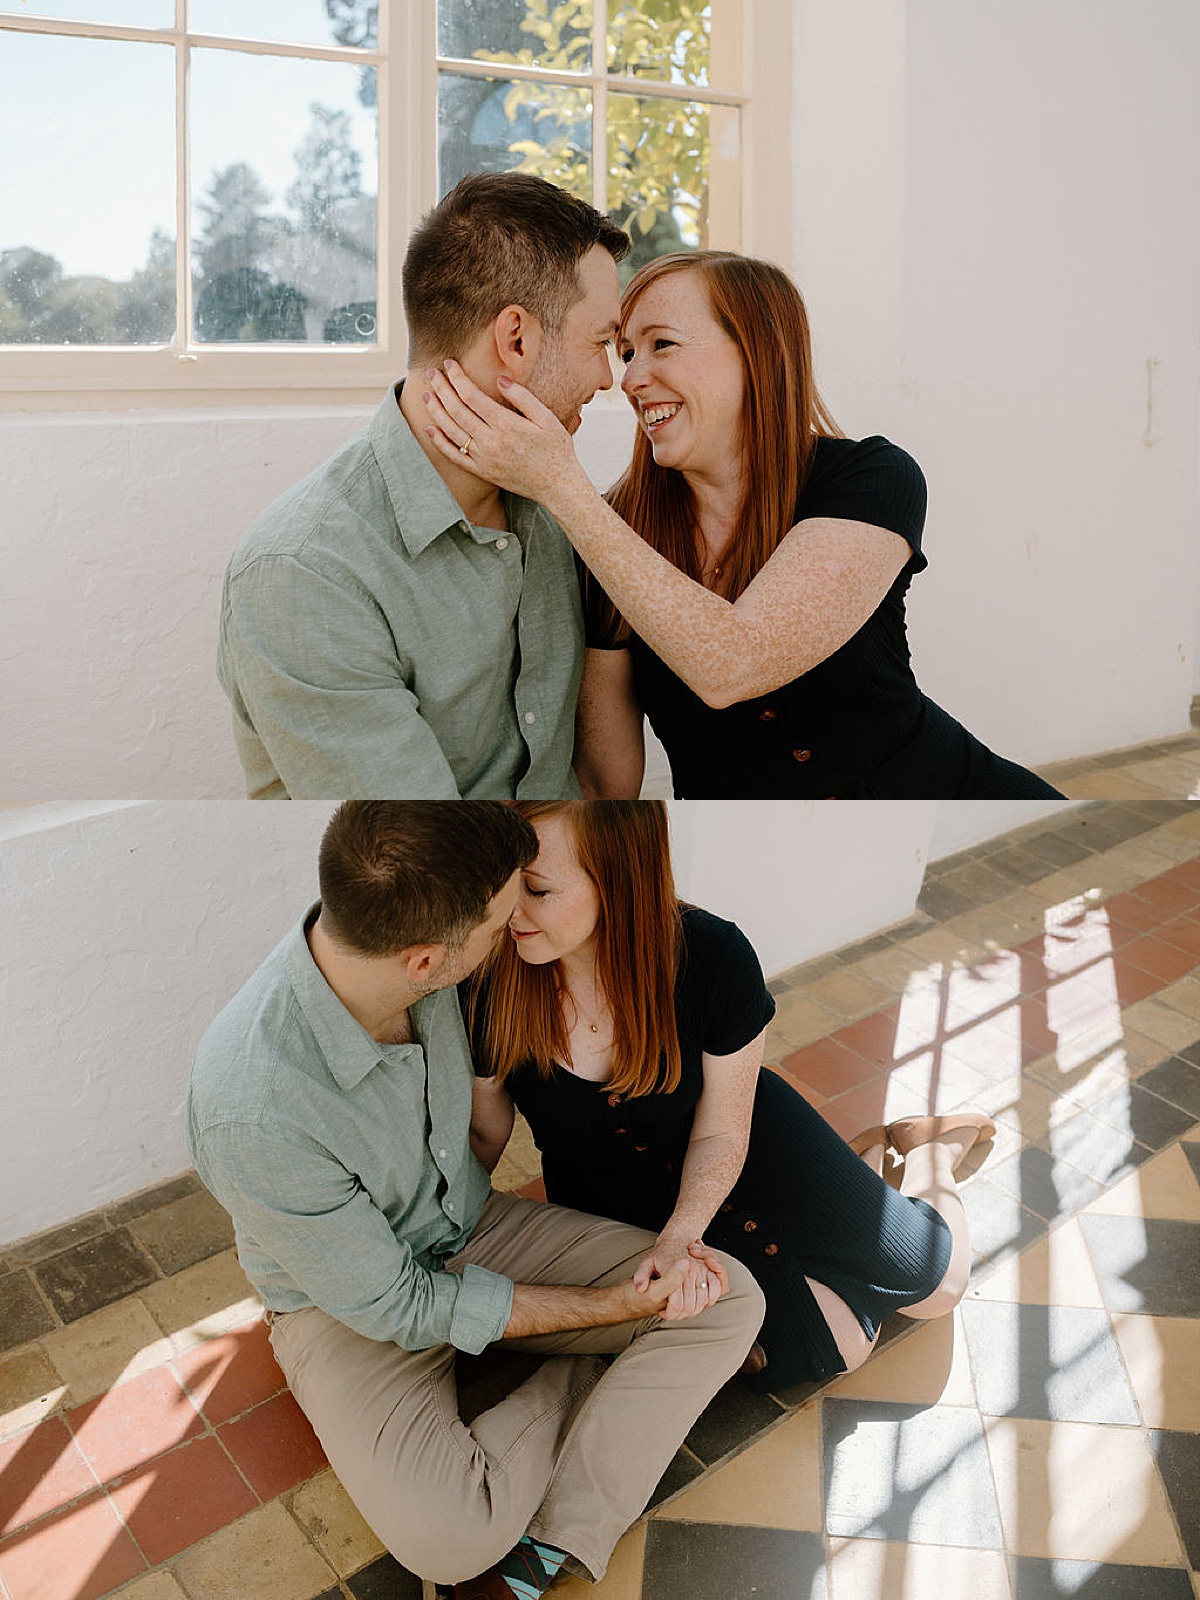 Red headed woman with freckles embraces fiance during romantic photoshoot with London Wedding Photographer